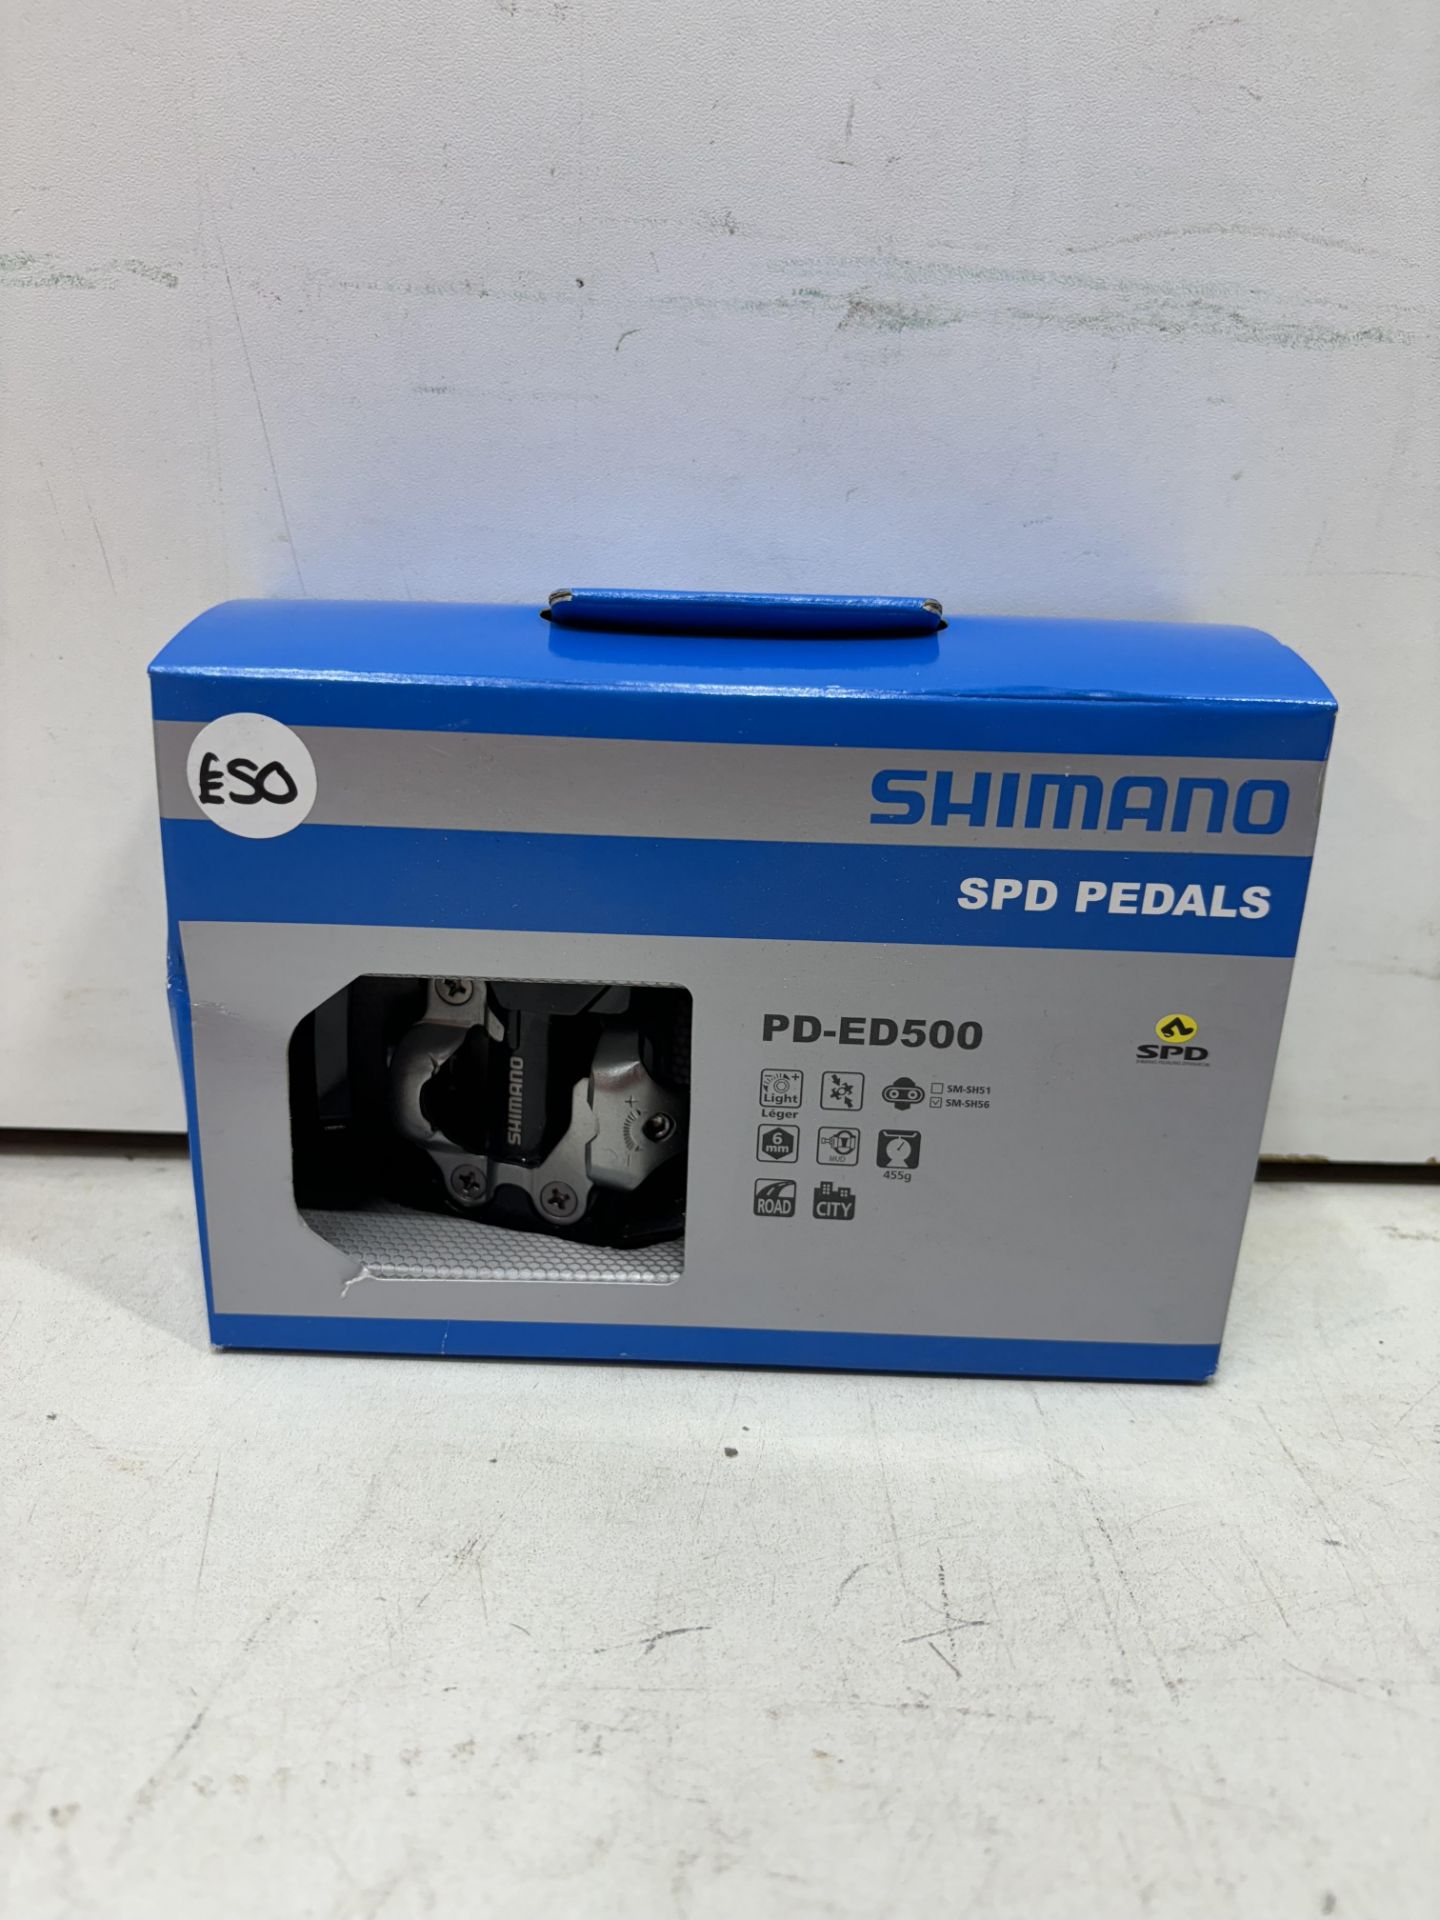 SHIMANO PD-ED500 Spd Road Pedals - Image 4 of 6